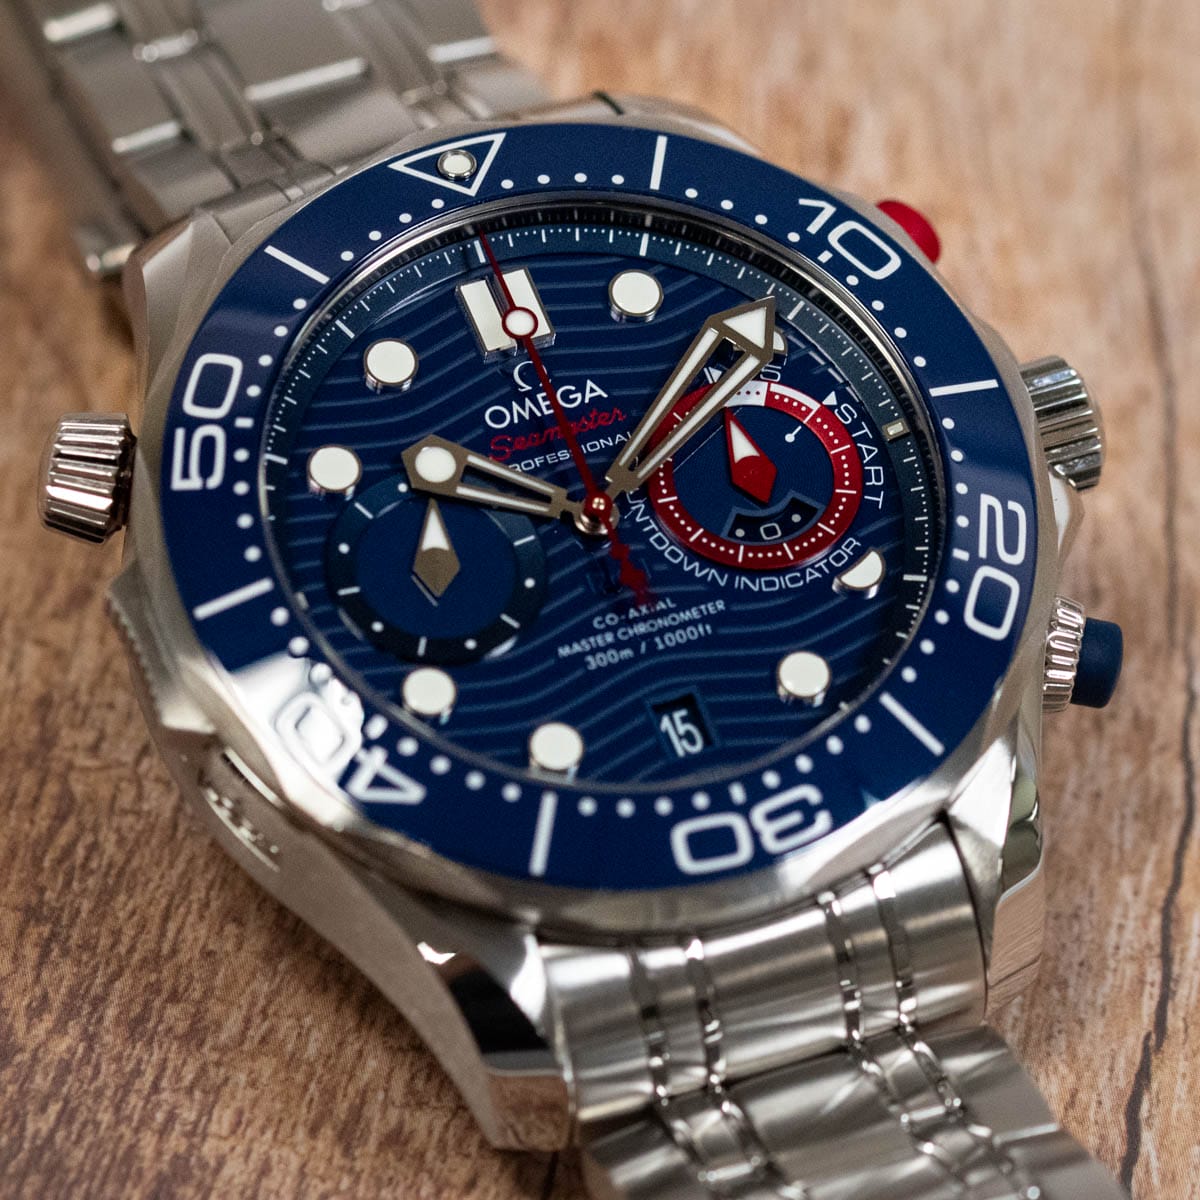 Extra Shot of Seamaster Chrono 'America's Cup'